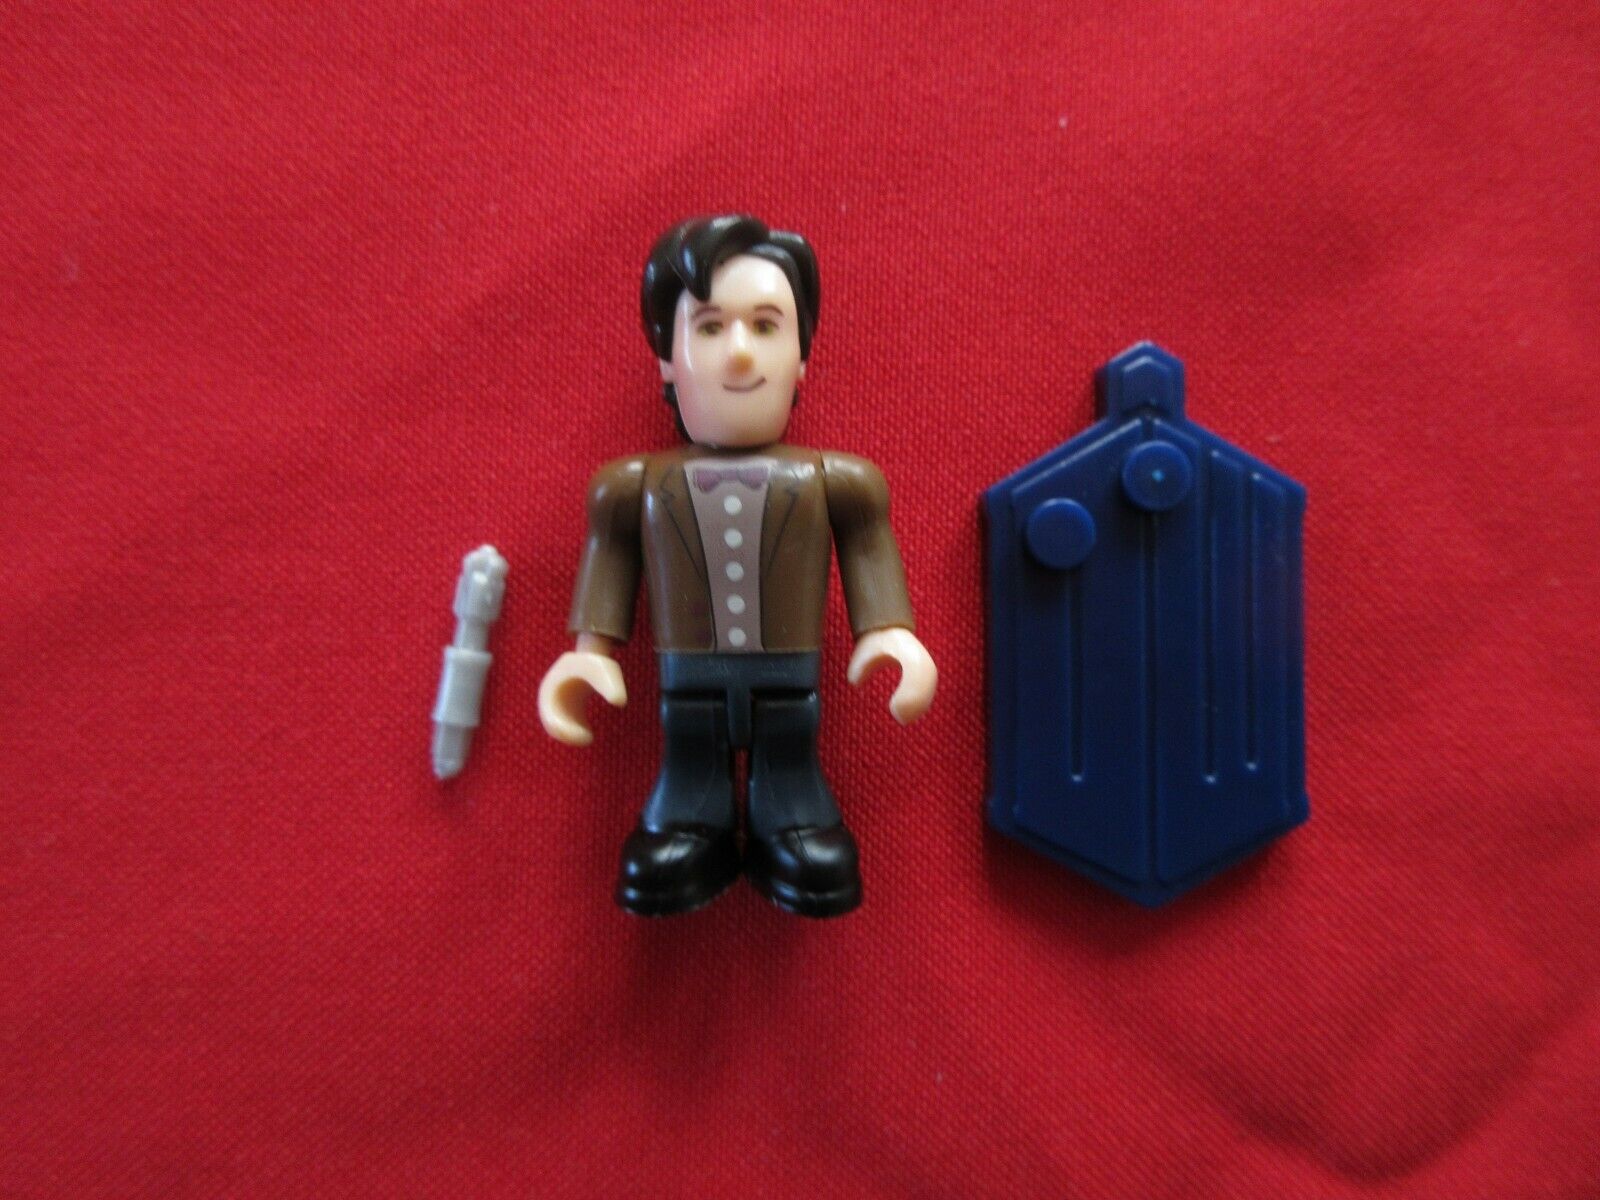 Dr. Who 11th Eleventh Doctor Matt Smith Micro Building Figure Minifig